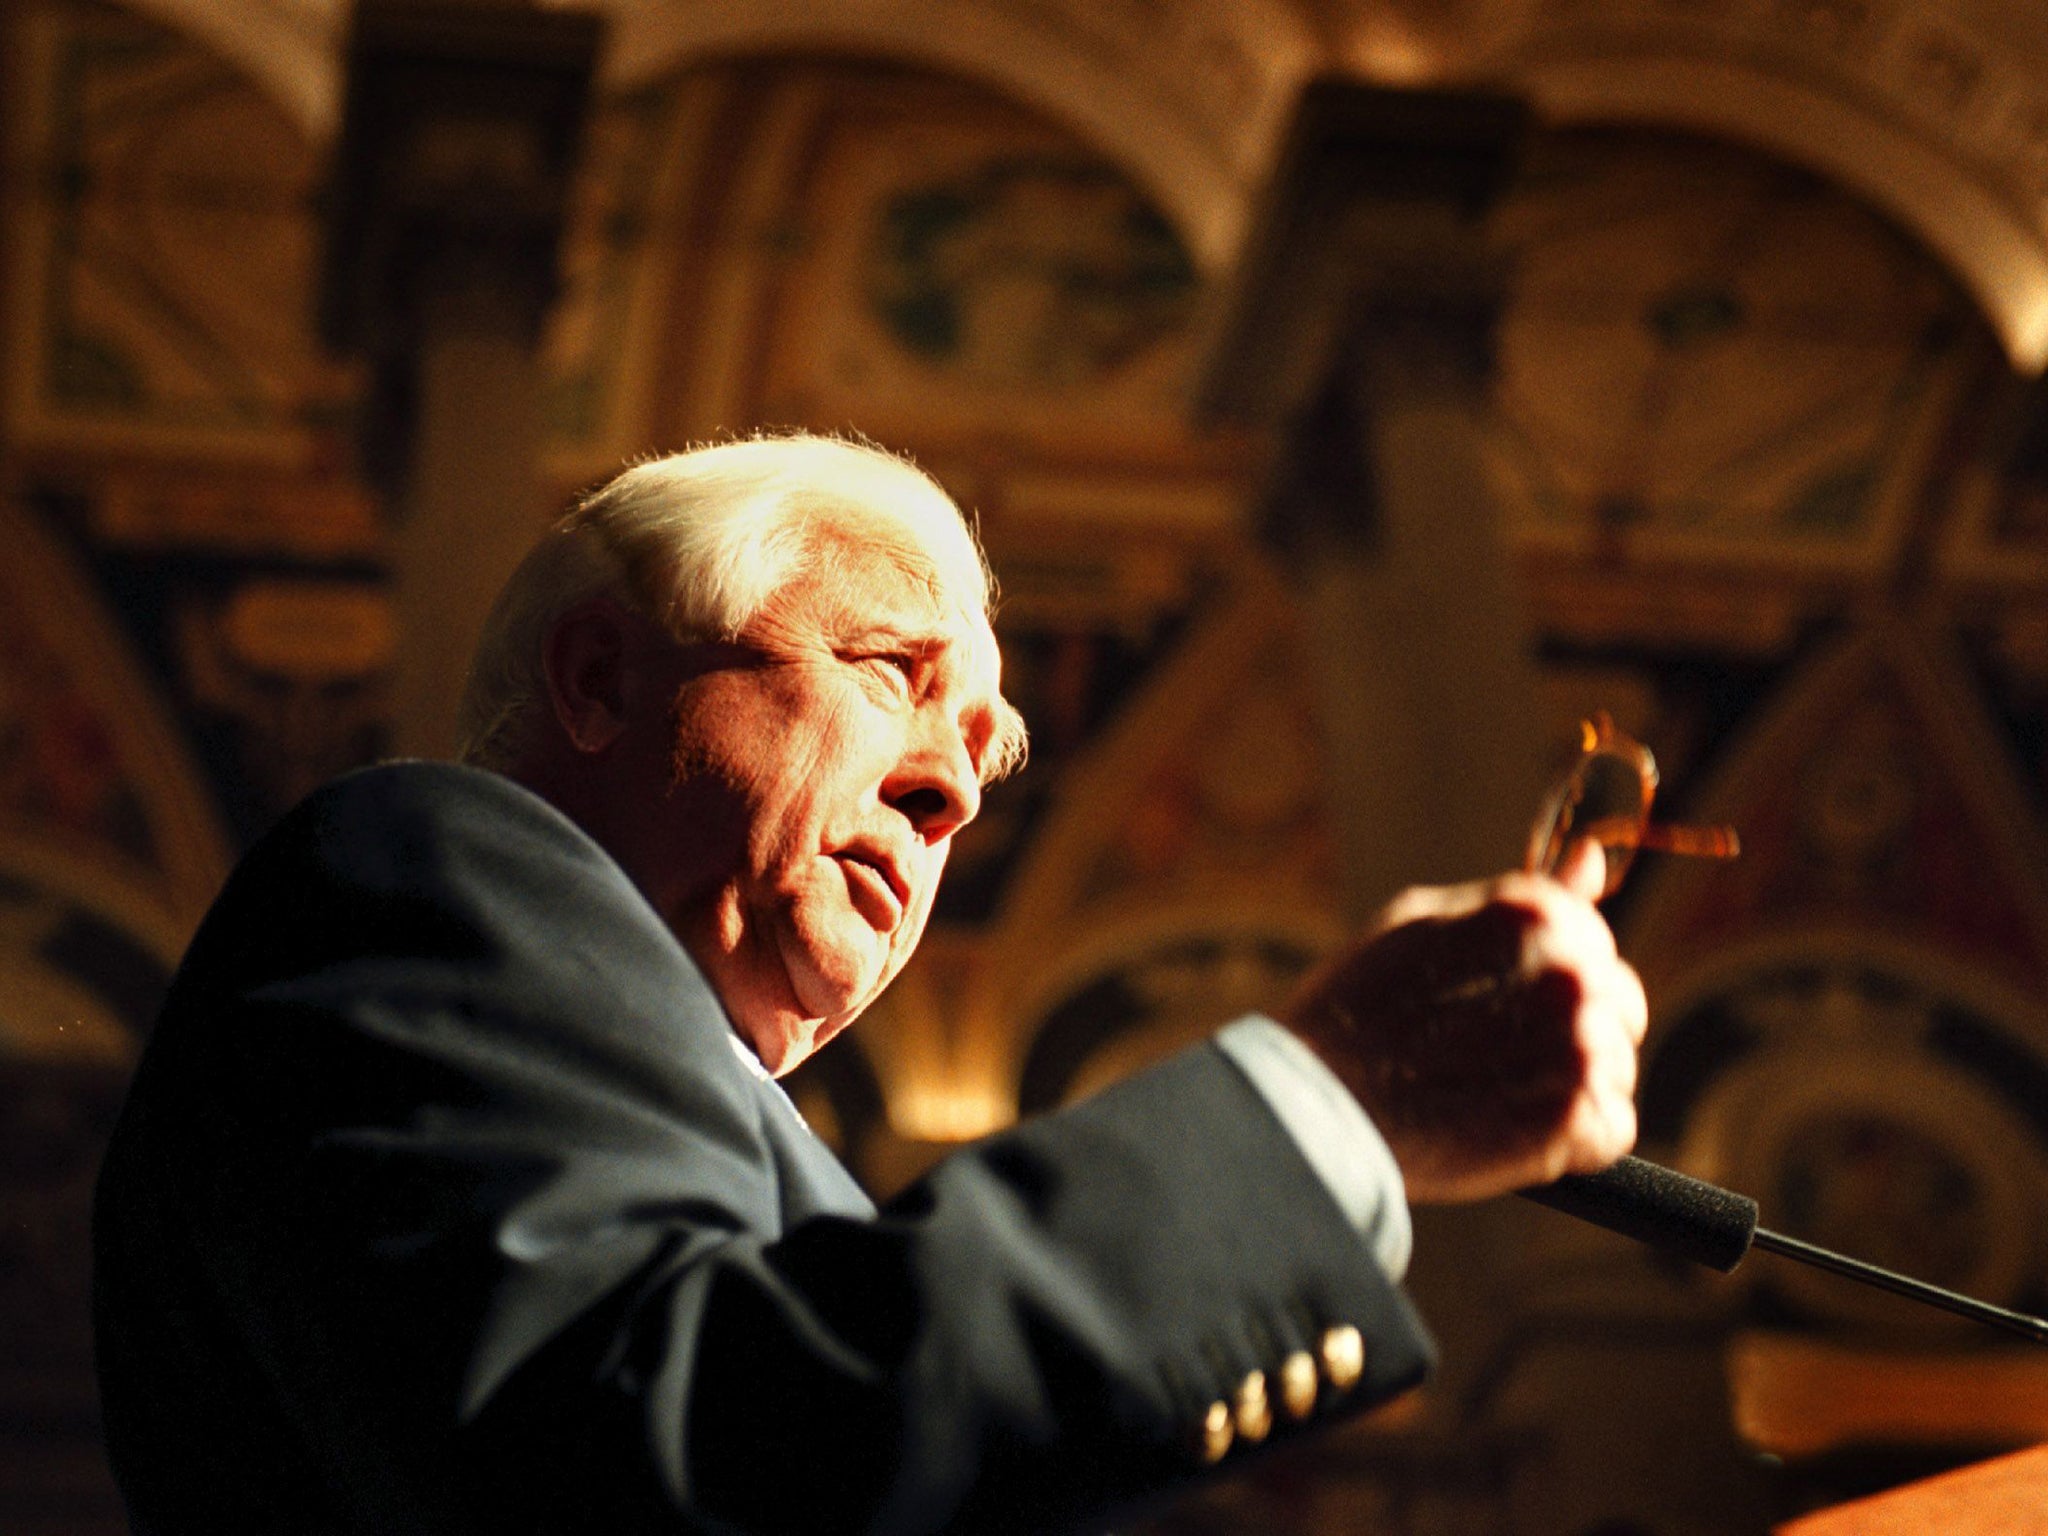 ‘History matters. That’s what I’ve tried to convey,’: McCullough delivers an address at the Library of Congress in 2000